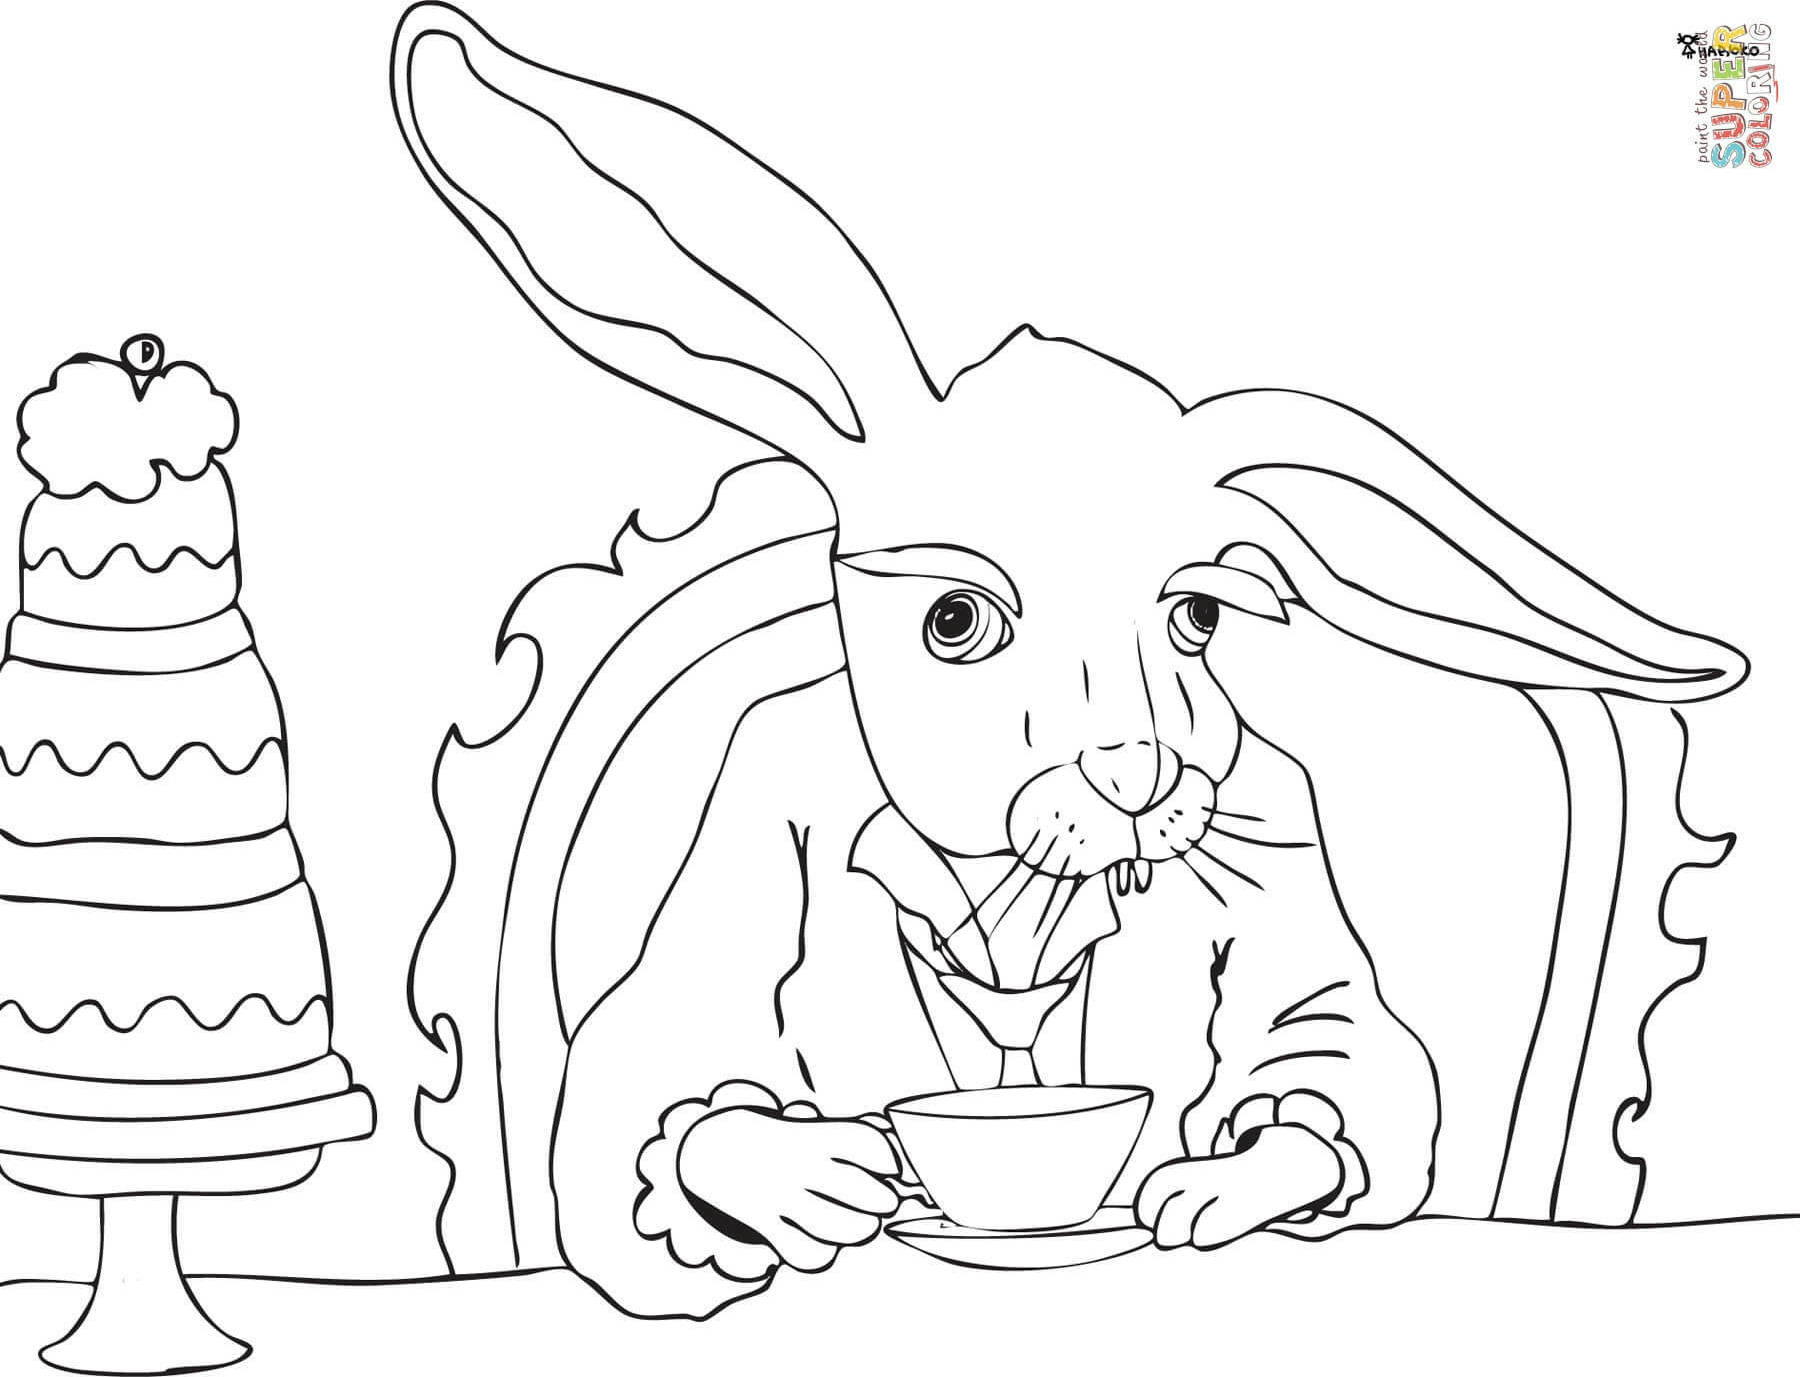 Alice in Wonderland coloring pages | Free Coloring Pages